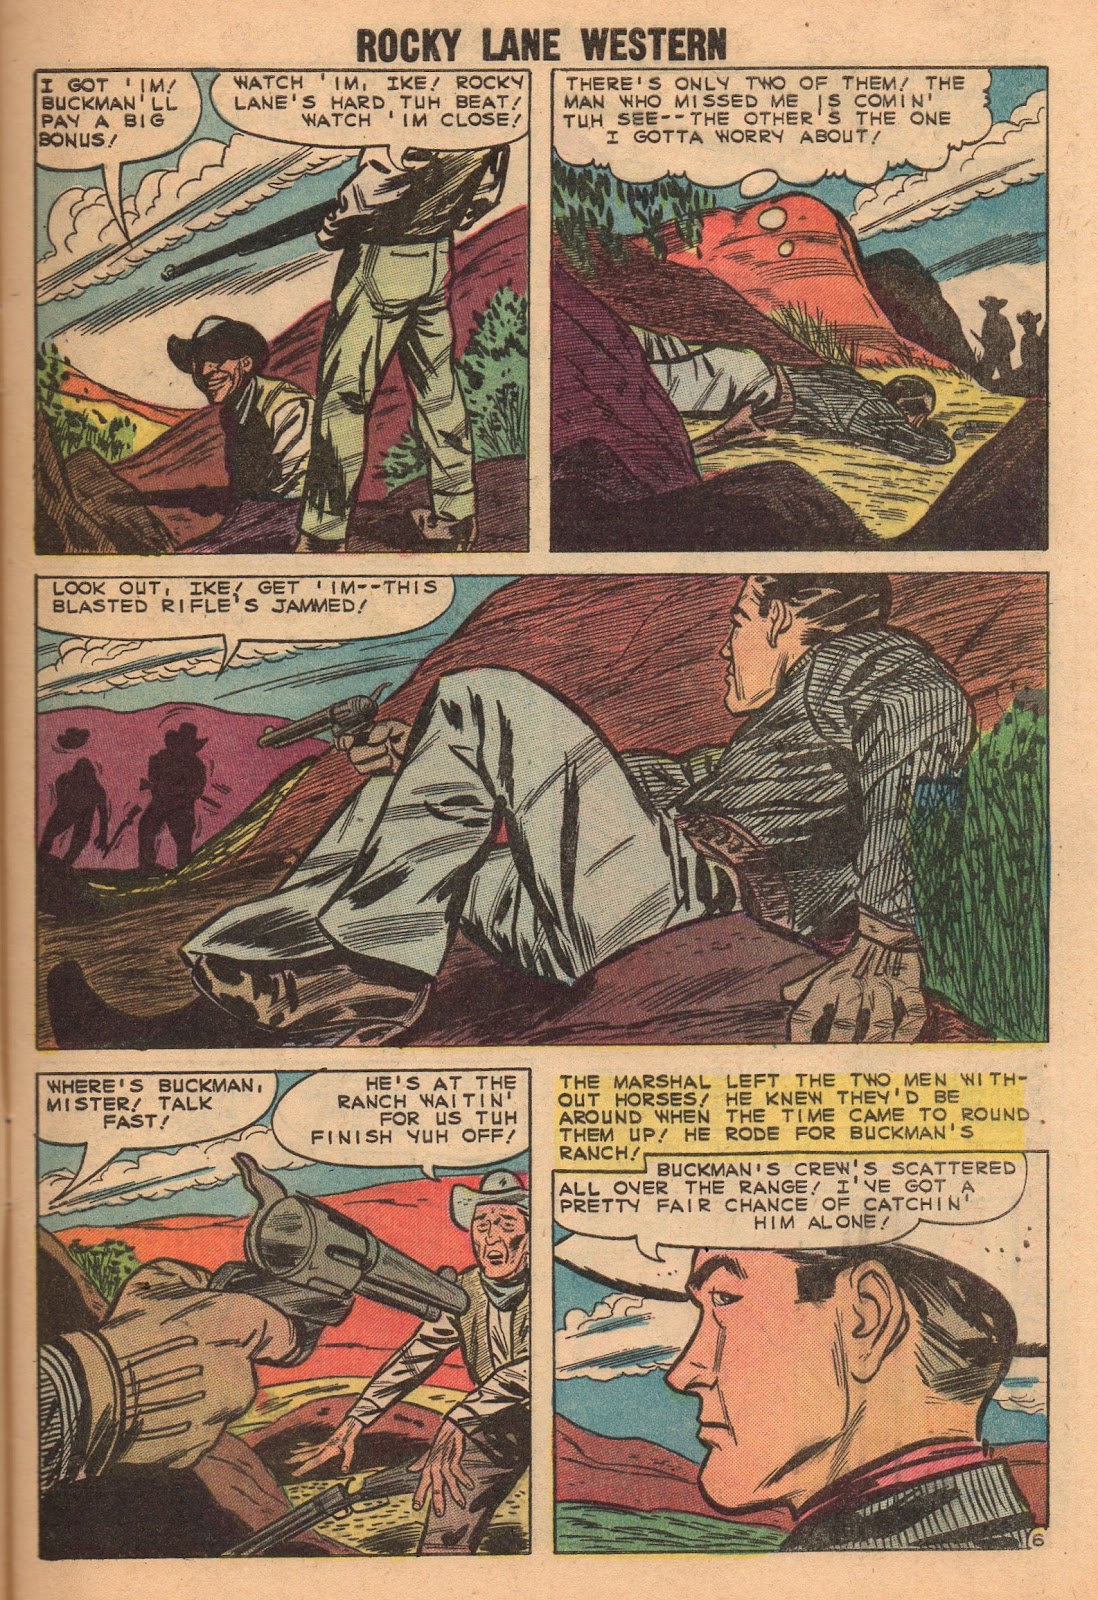 Rocky Lane Western (1954) issue 86 - Page 9